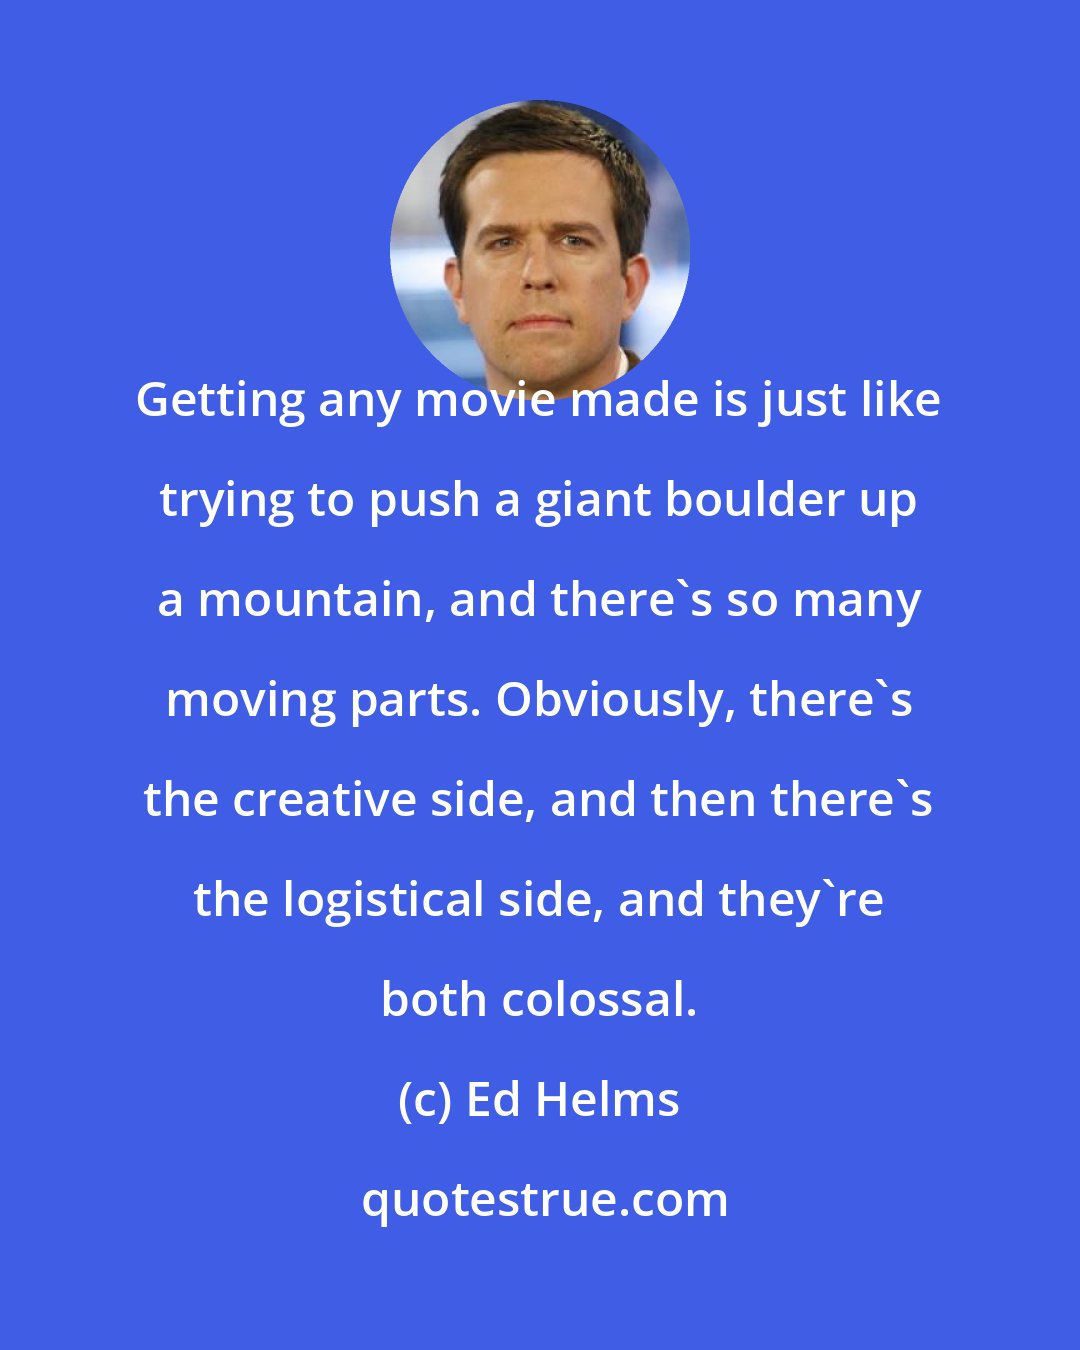 Ed Helms: Getting any movie made is just like trying to push a giant boulder up a mountain, and there's so many moving parts. Obviously, there's the creative side, and then there's the logistical side, and they're both colossal.